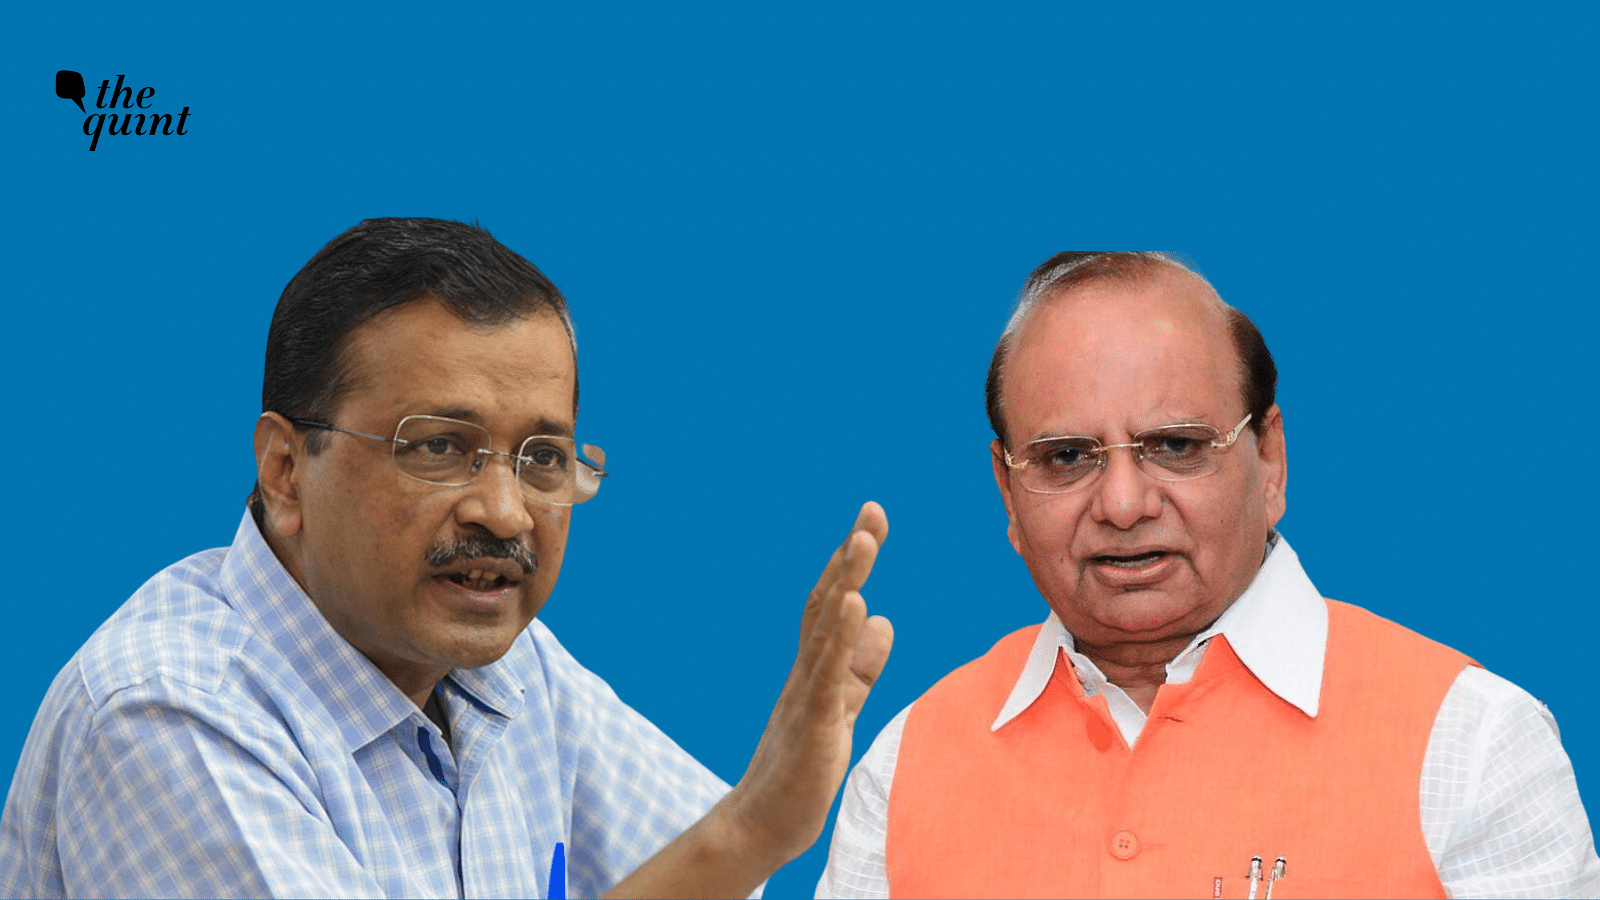 <div class="paragraphs"><p>The Centre has brought in a new ordinance giving authority to the <a href="https://www.thequint.com/news/india/arvind-kejriwal-bhagwant-mann-roadshow-jalandhar-aap">Lieutenant Governor of Delhi</a> regarding matters of “transfer posting, vigilance, and other incidental matters.”</p></div>